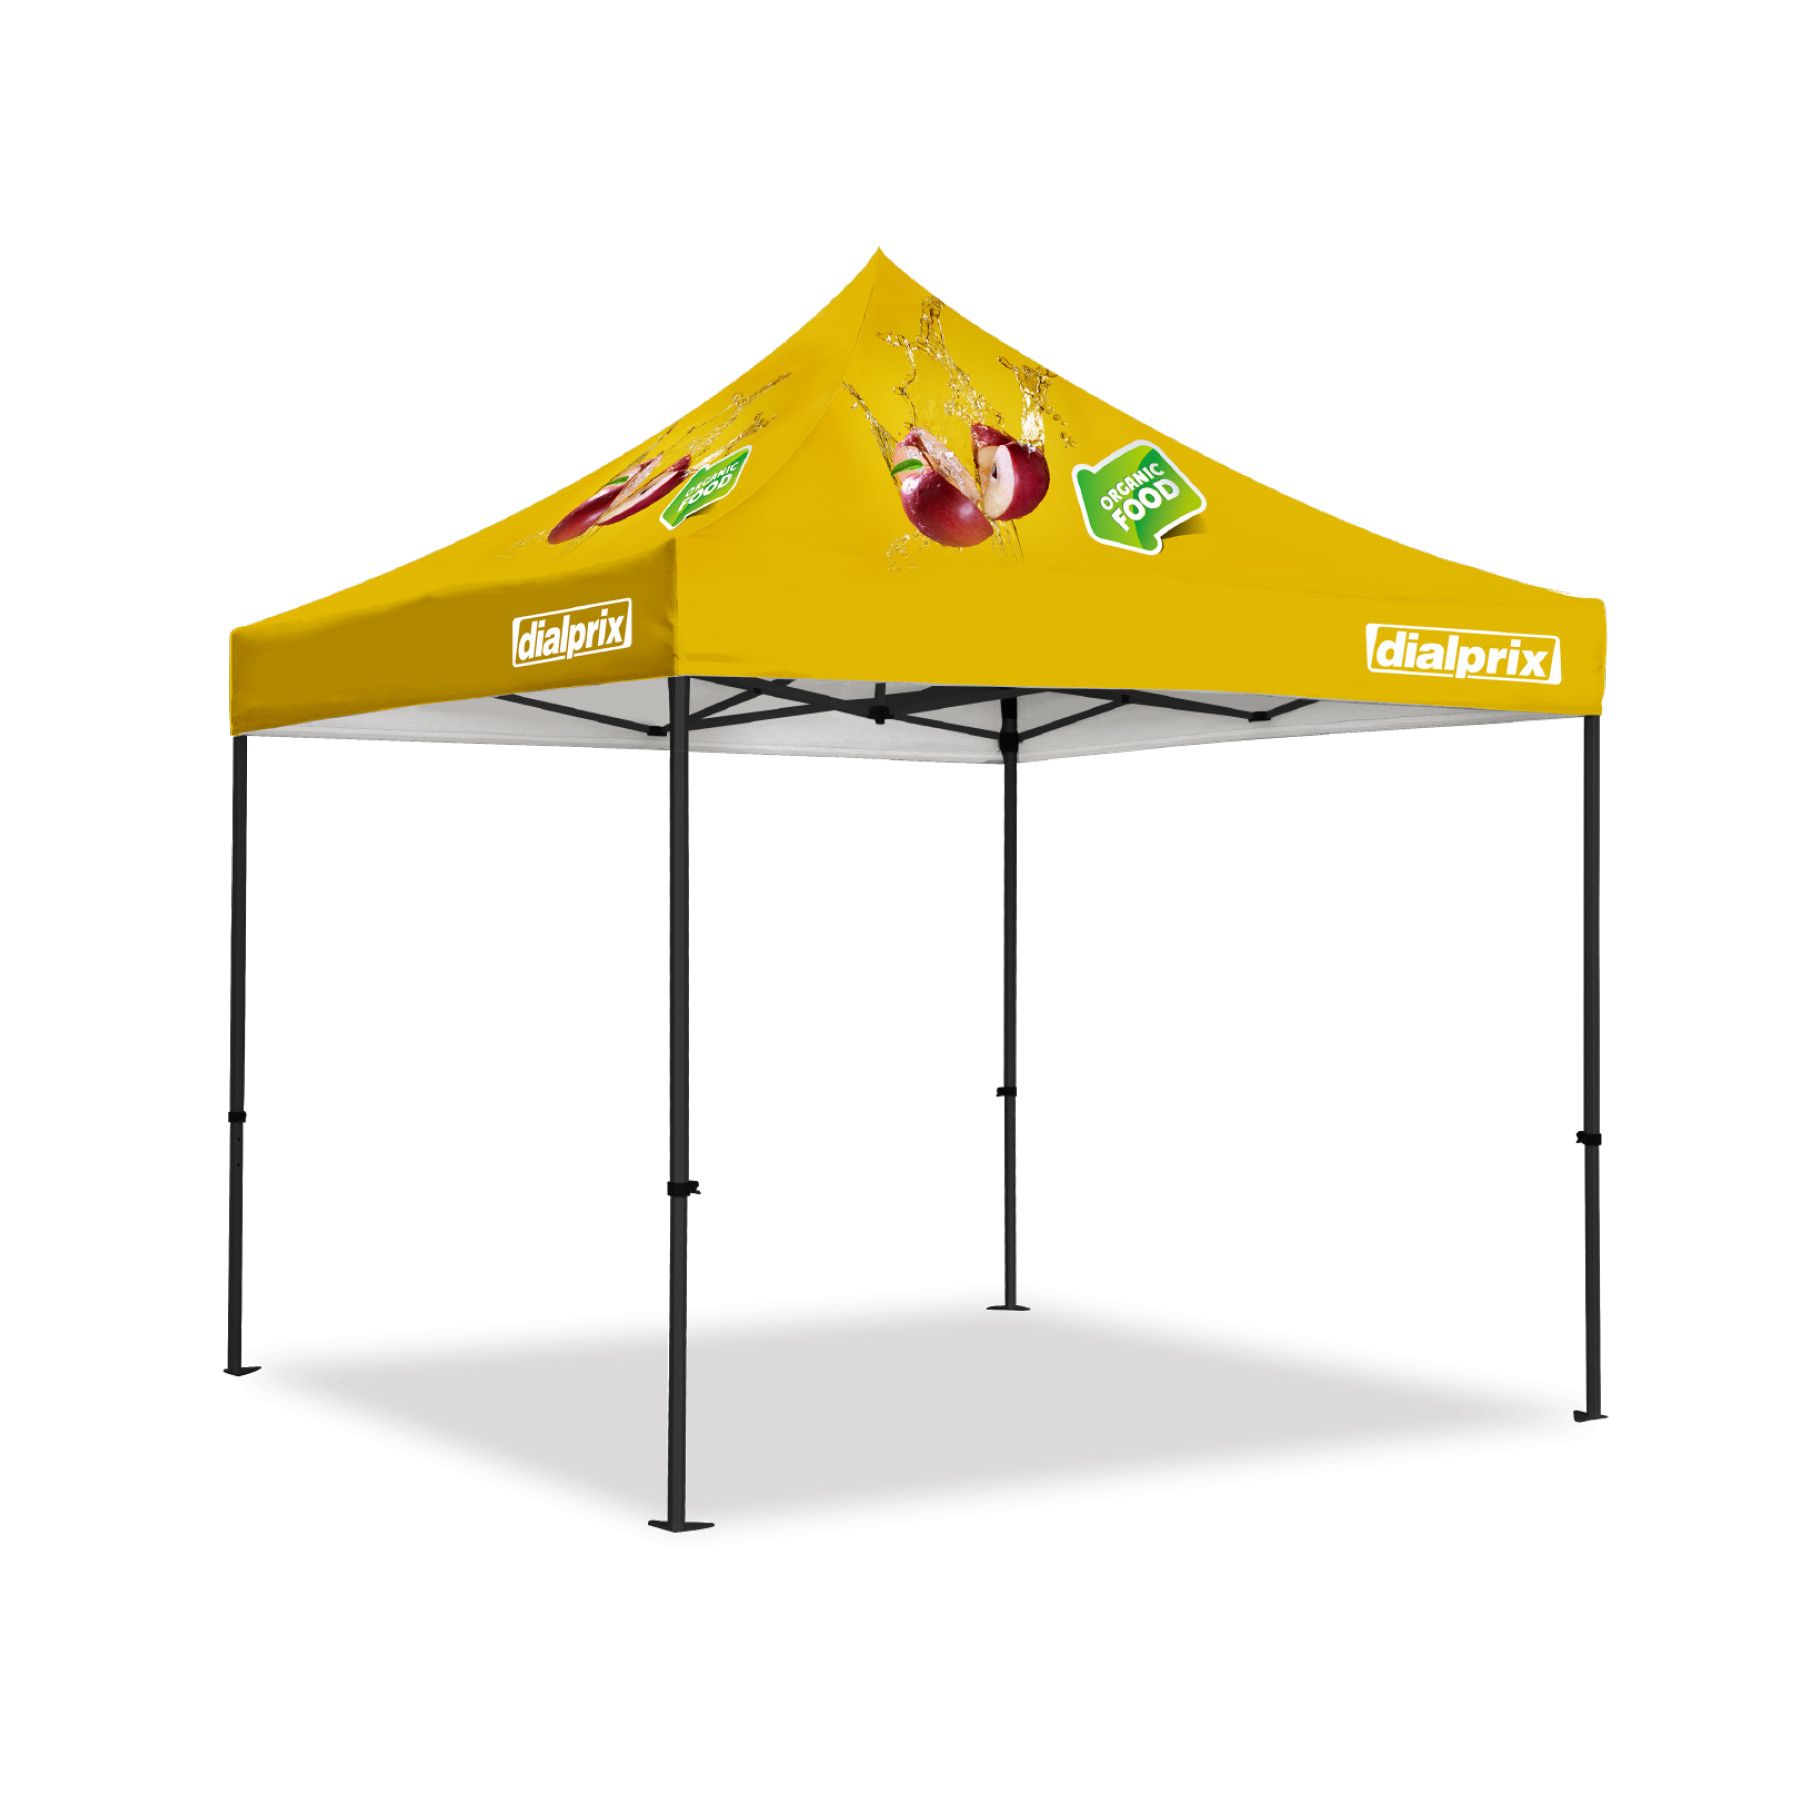 Deluxe Pop-Up Tent Kit With Black Steel Frame (30mm post, 1.2mm gauge)  Dye Sublimation on Canopy - 10x10ft